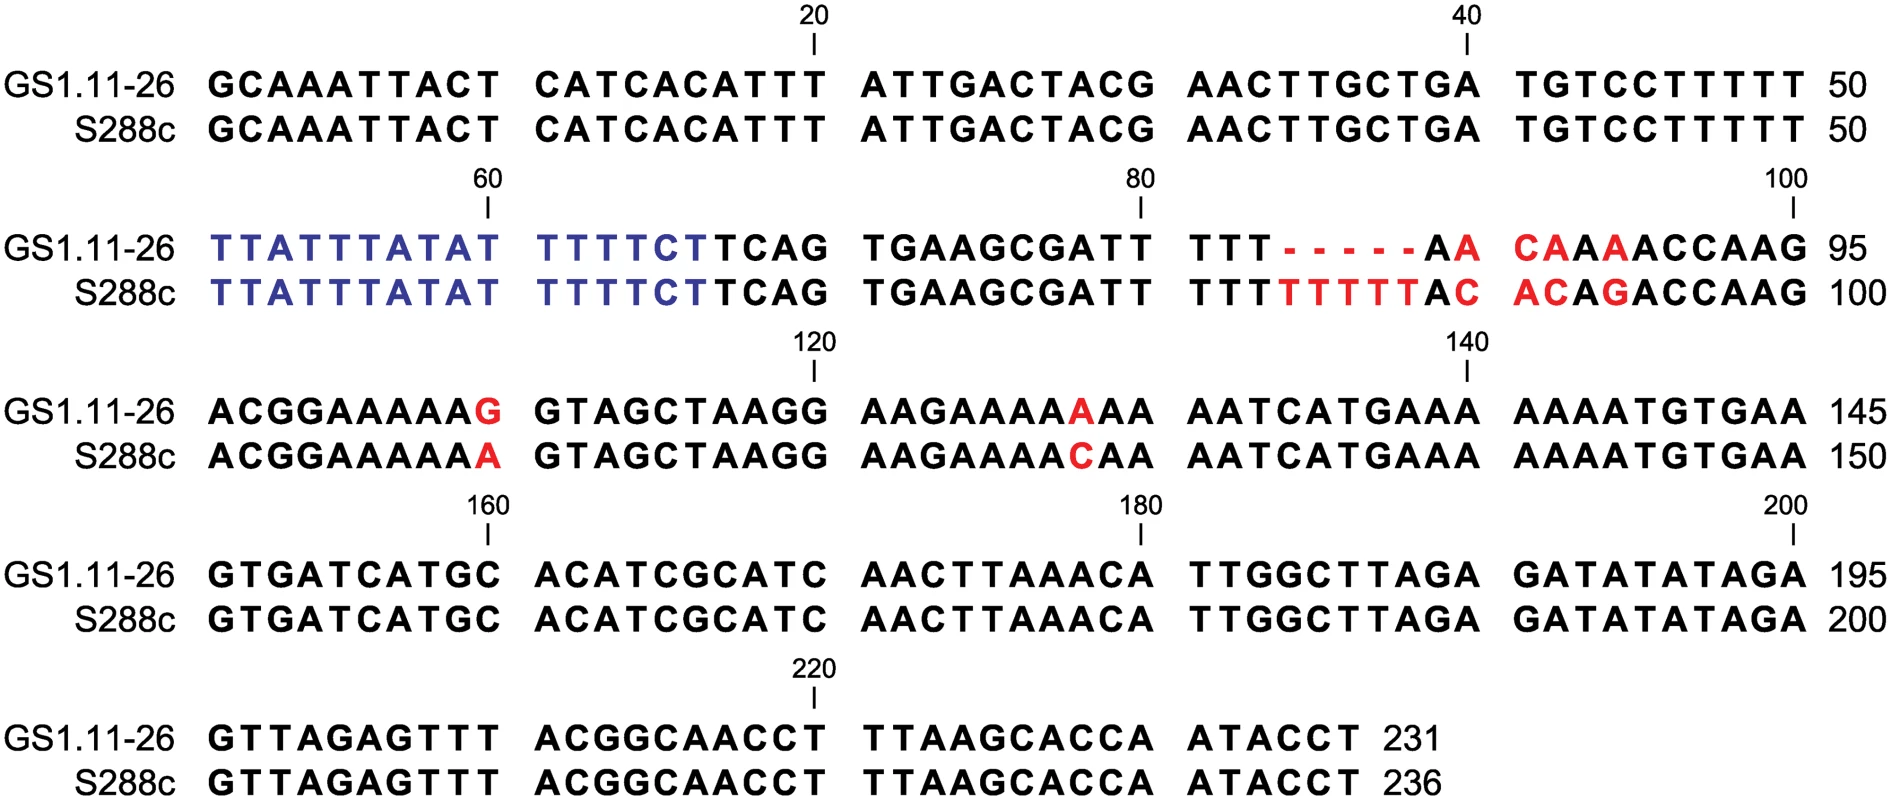 ARS1529 sequence comparison between the evolved strain GS1.11–26 and the sequence in the reference strain S288c.